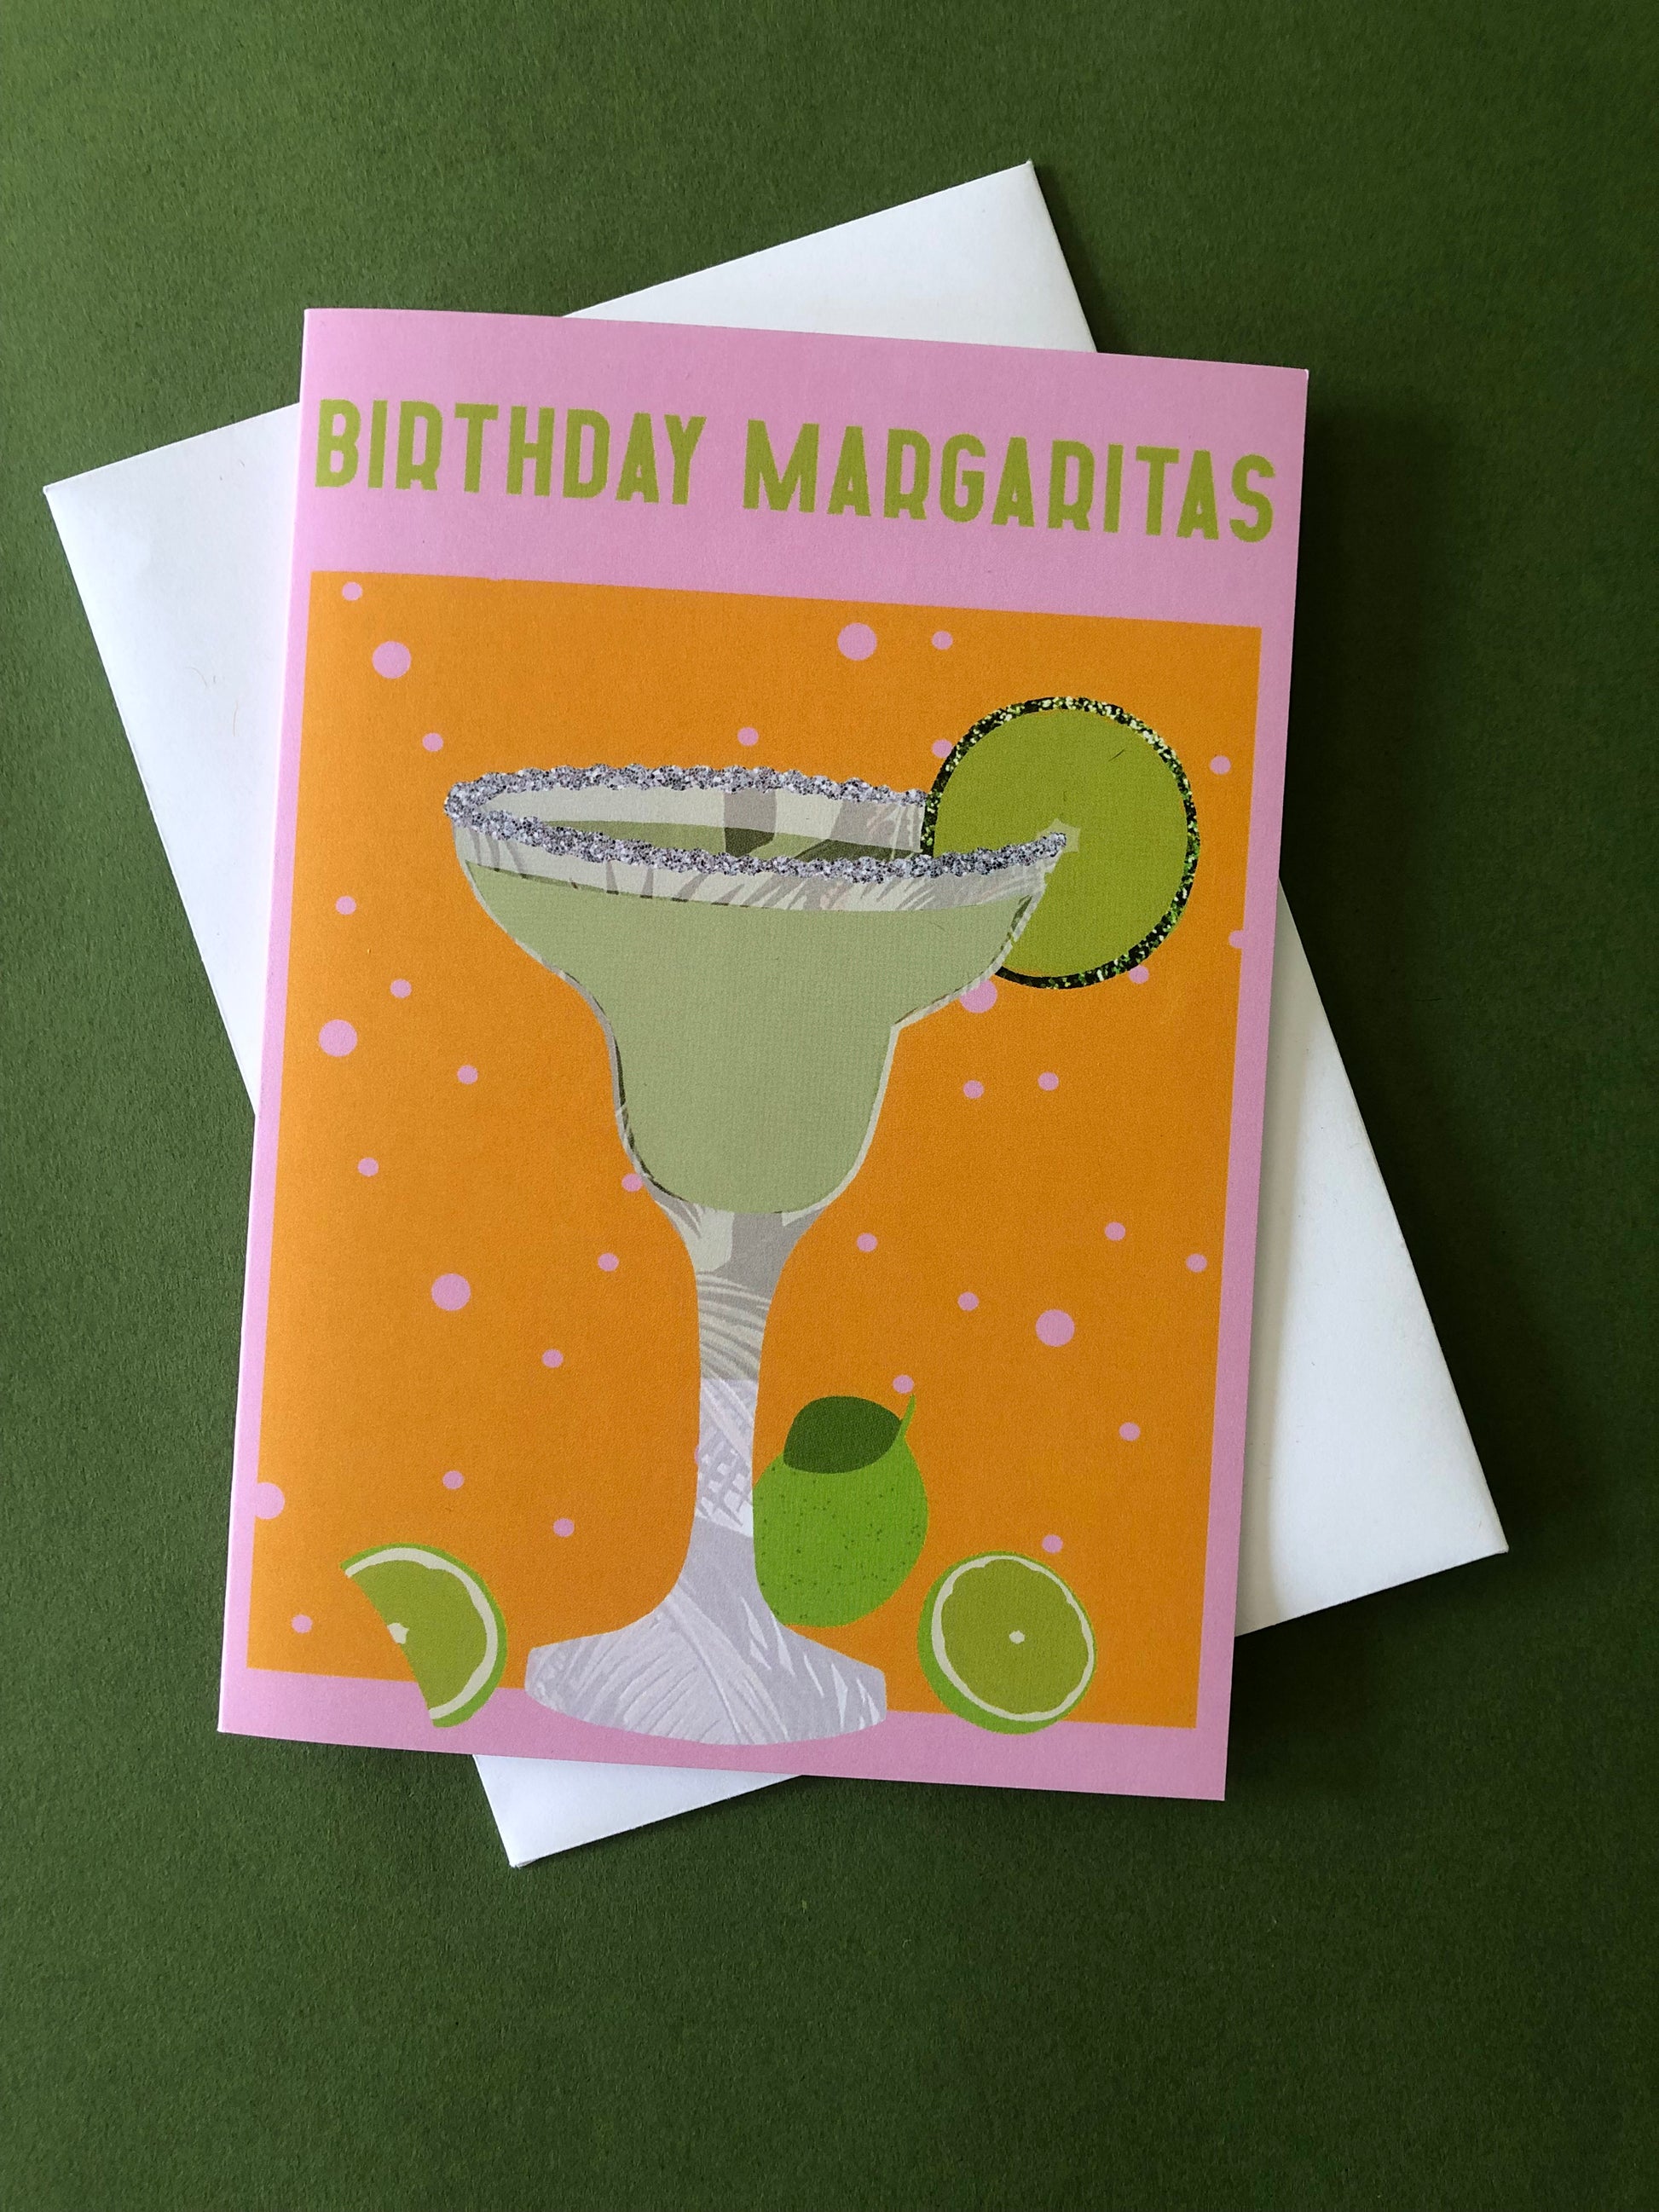 Bright and colourful birthday card featuring a margarita cocktail on a green background.